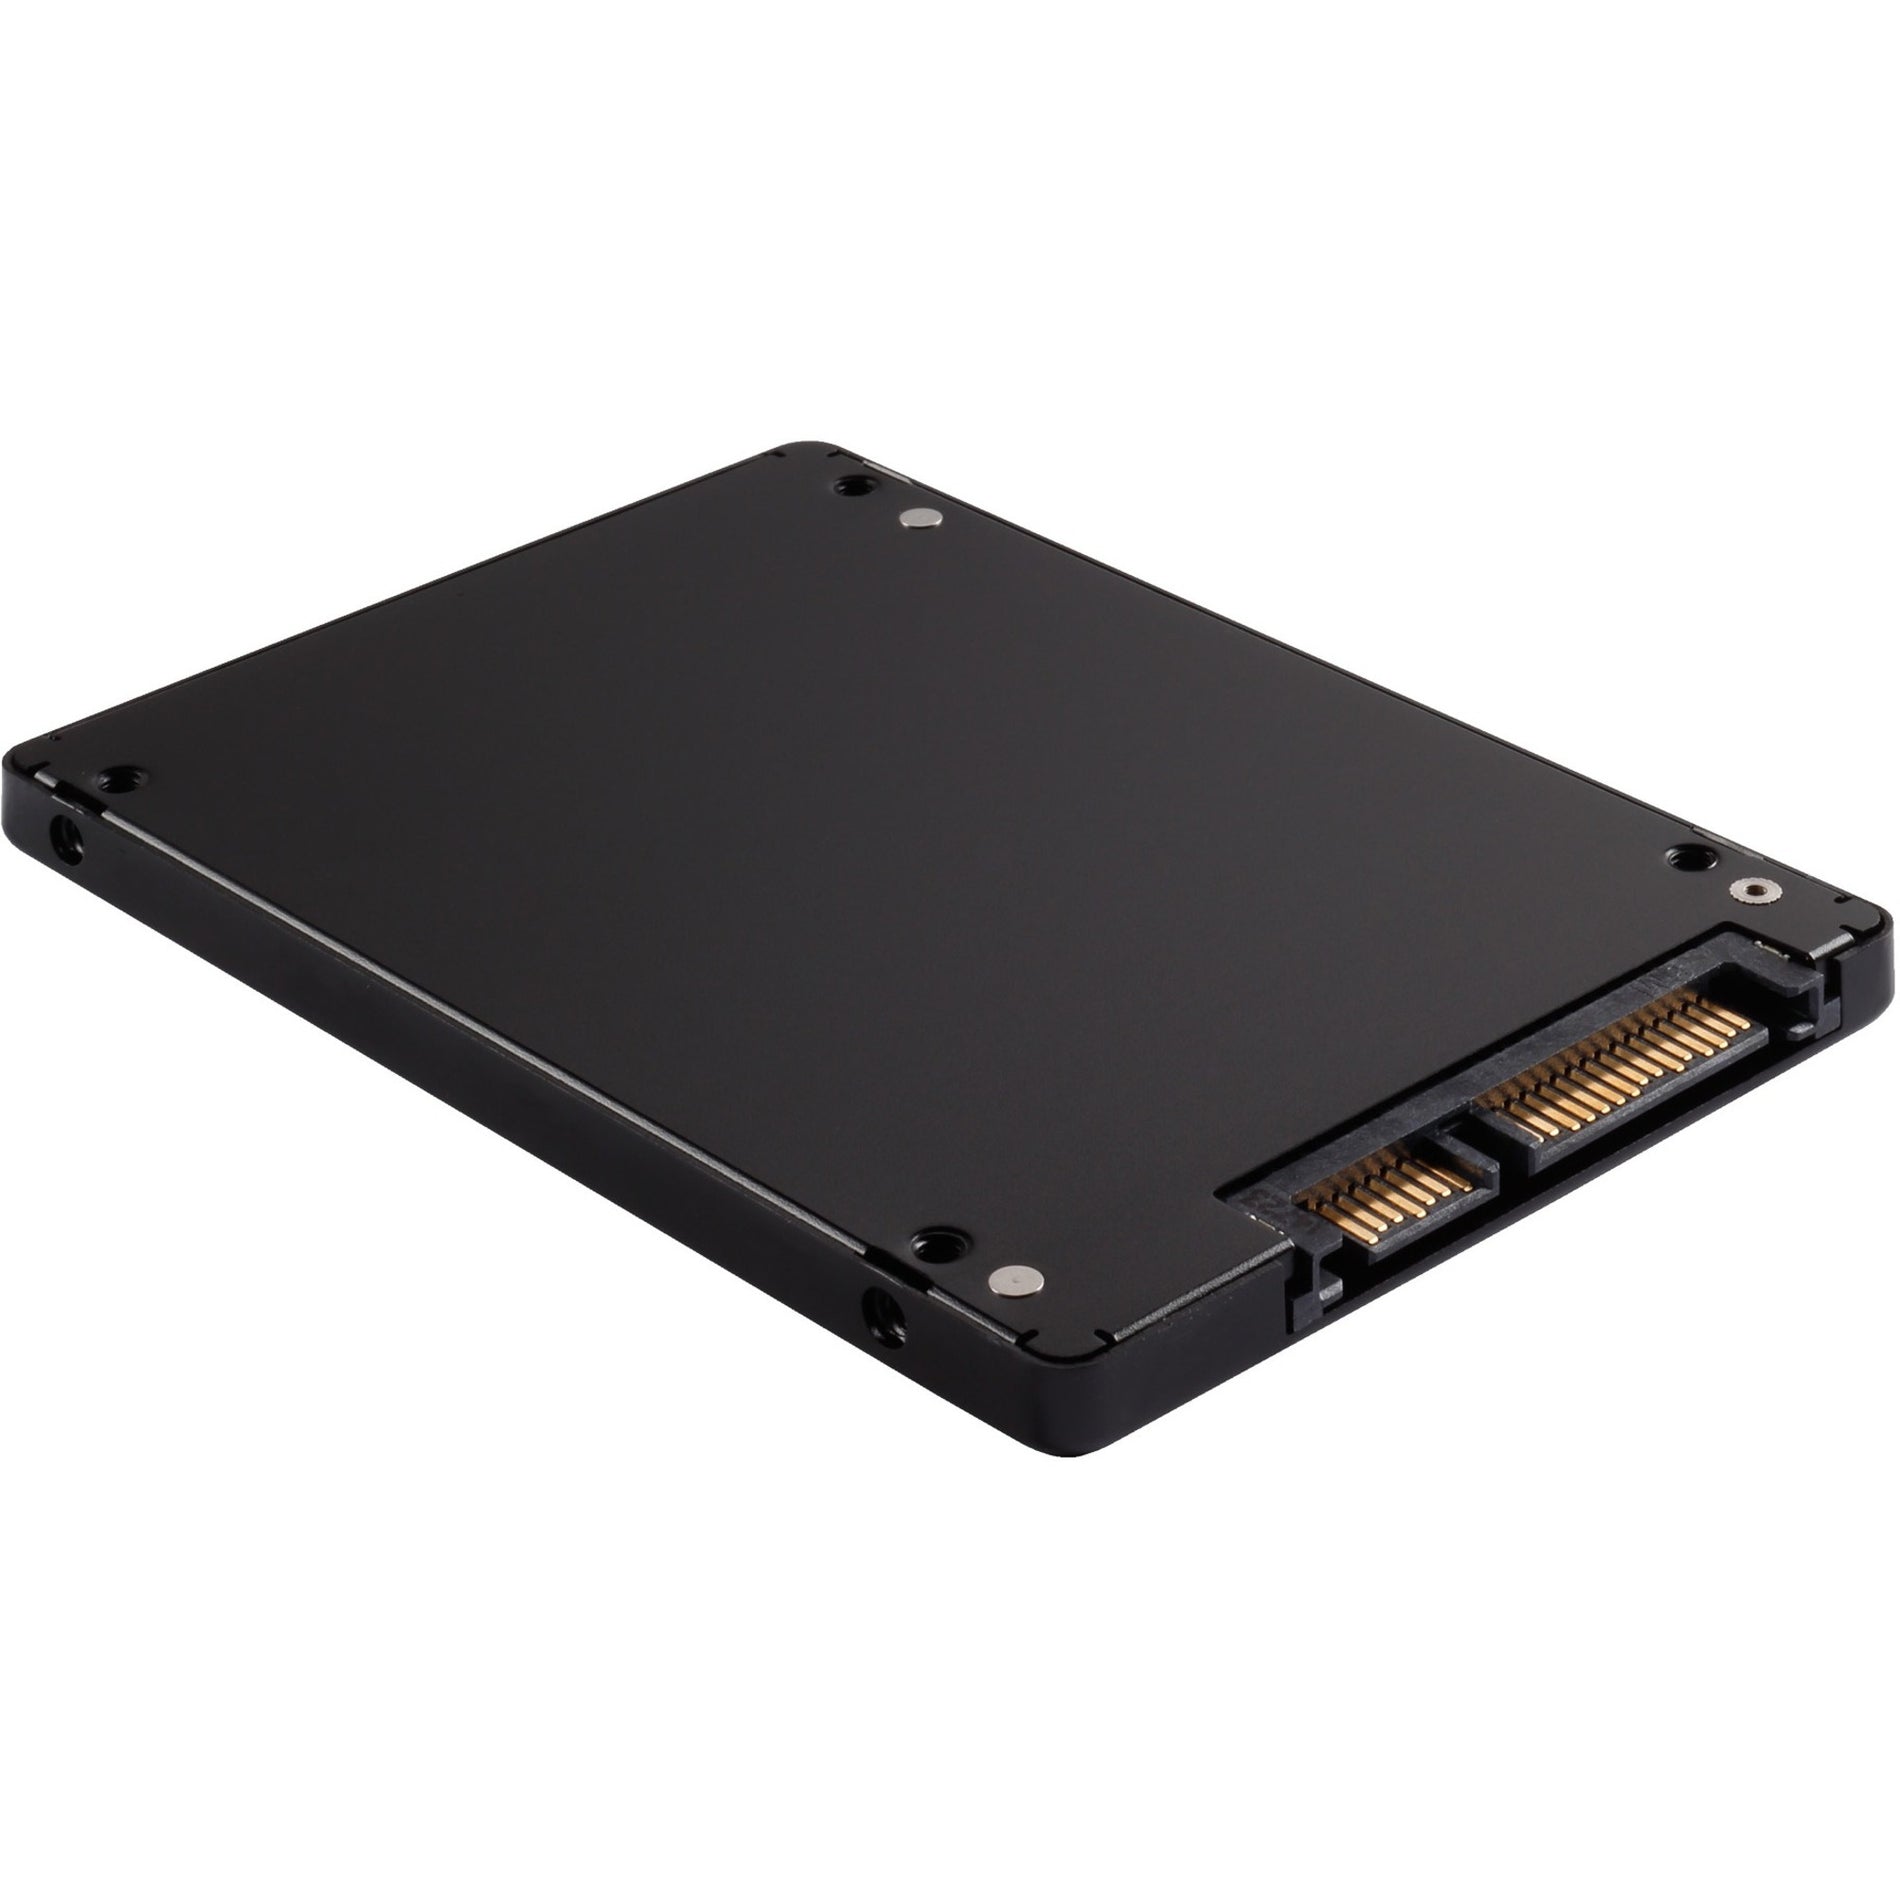 VisionTek 901409 8TB QLC 7mm 2.5" SSD, High Capacity and Fast Performance